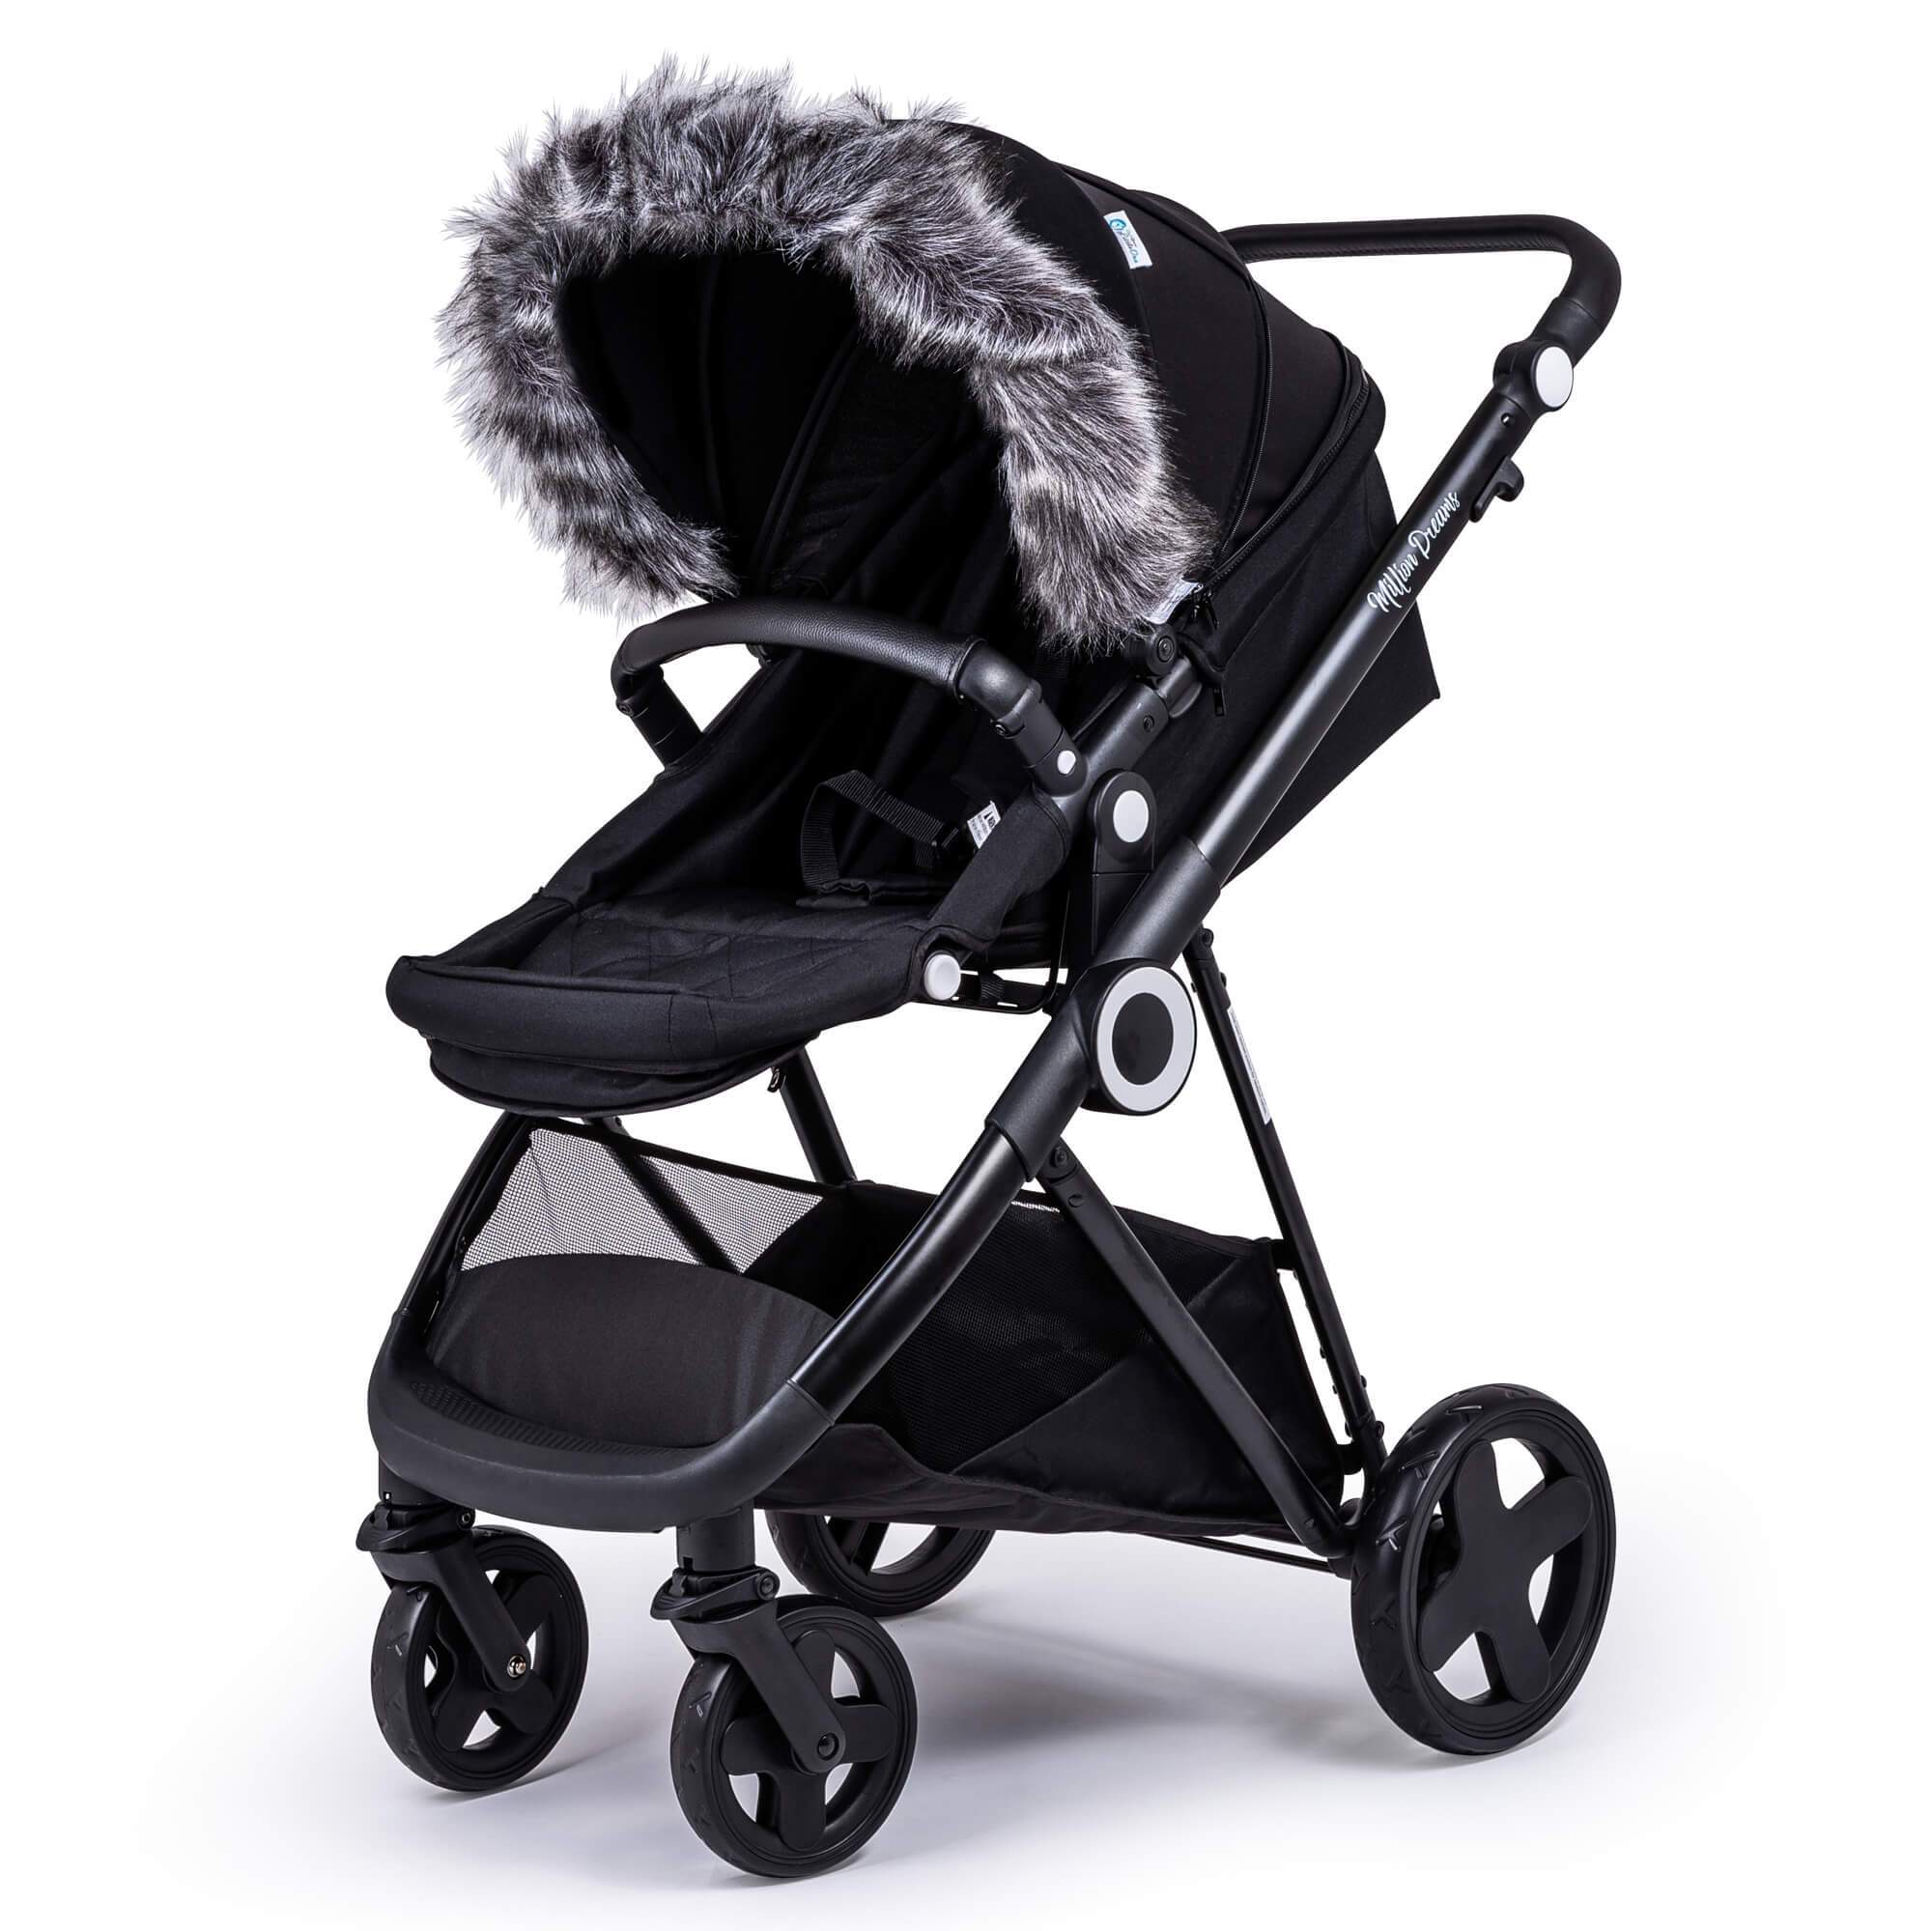 Pram Fur Hood Trim Attachment for Pushchair Compatible with BabyDan - Dark Grey / Fits All Models | For Your Little One